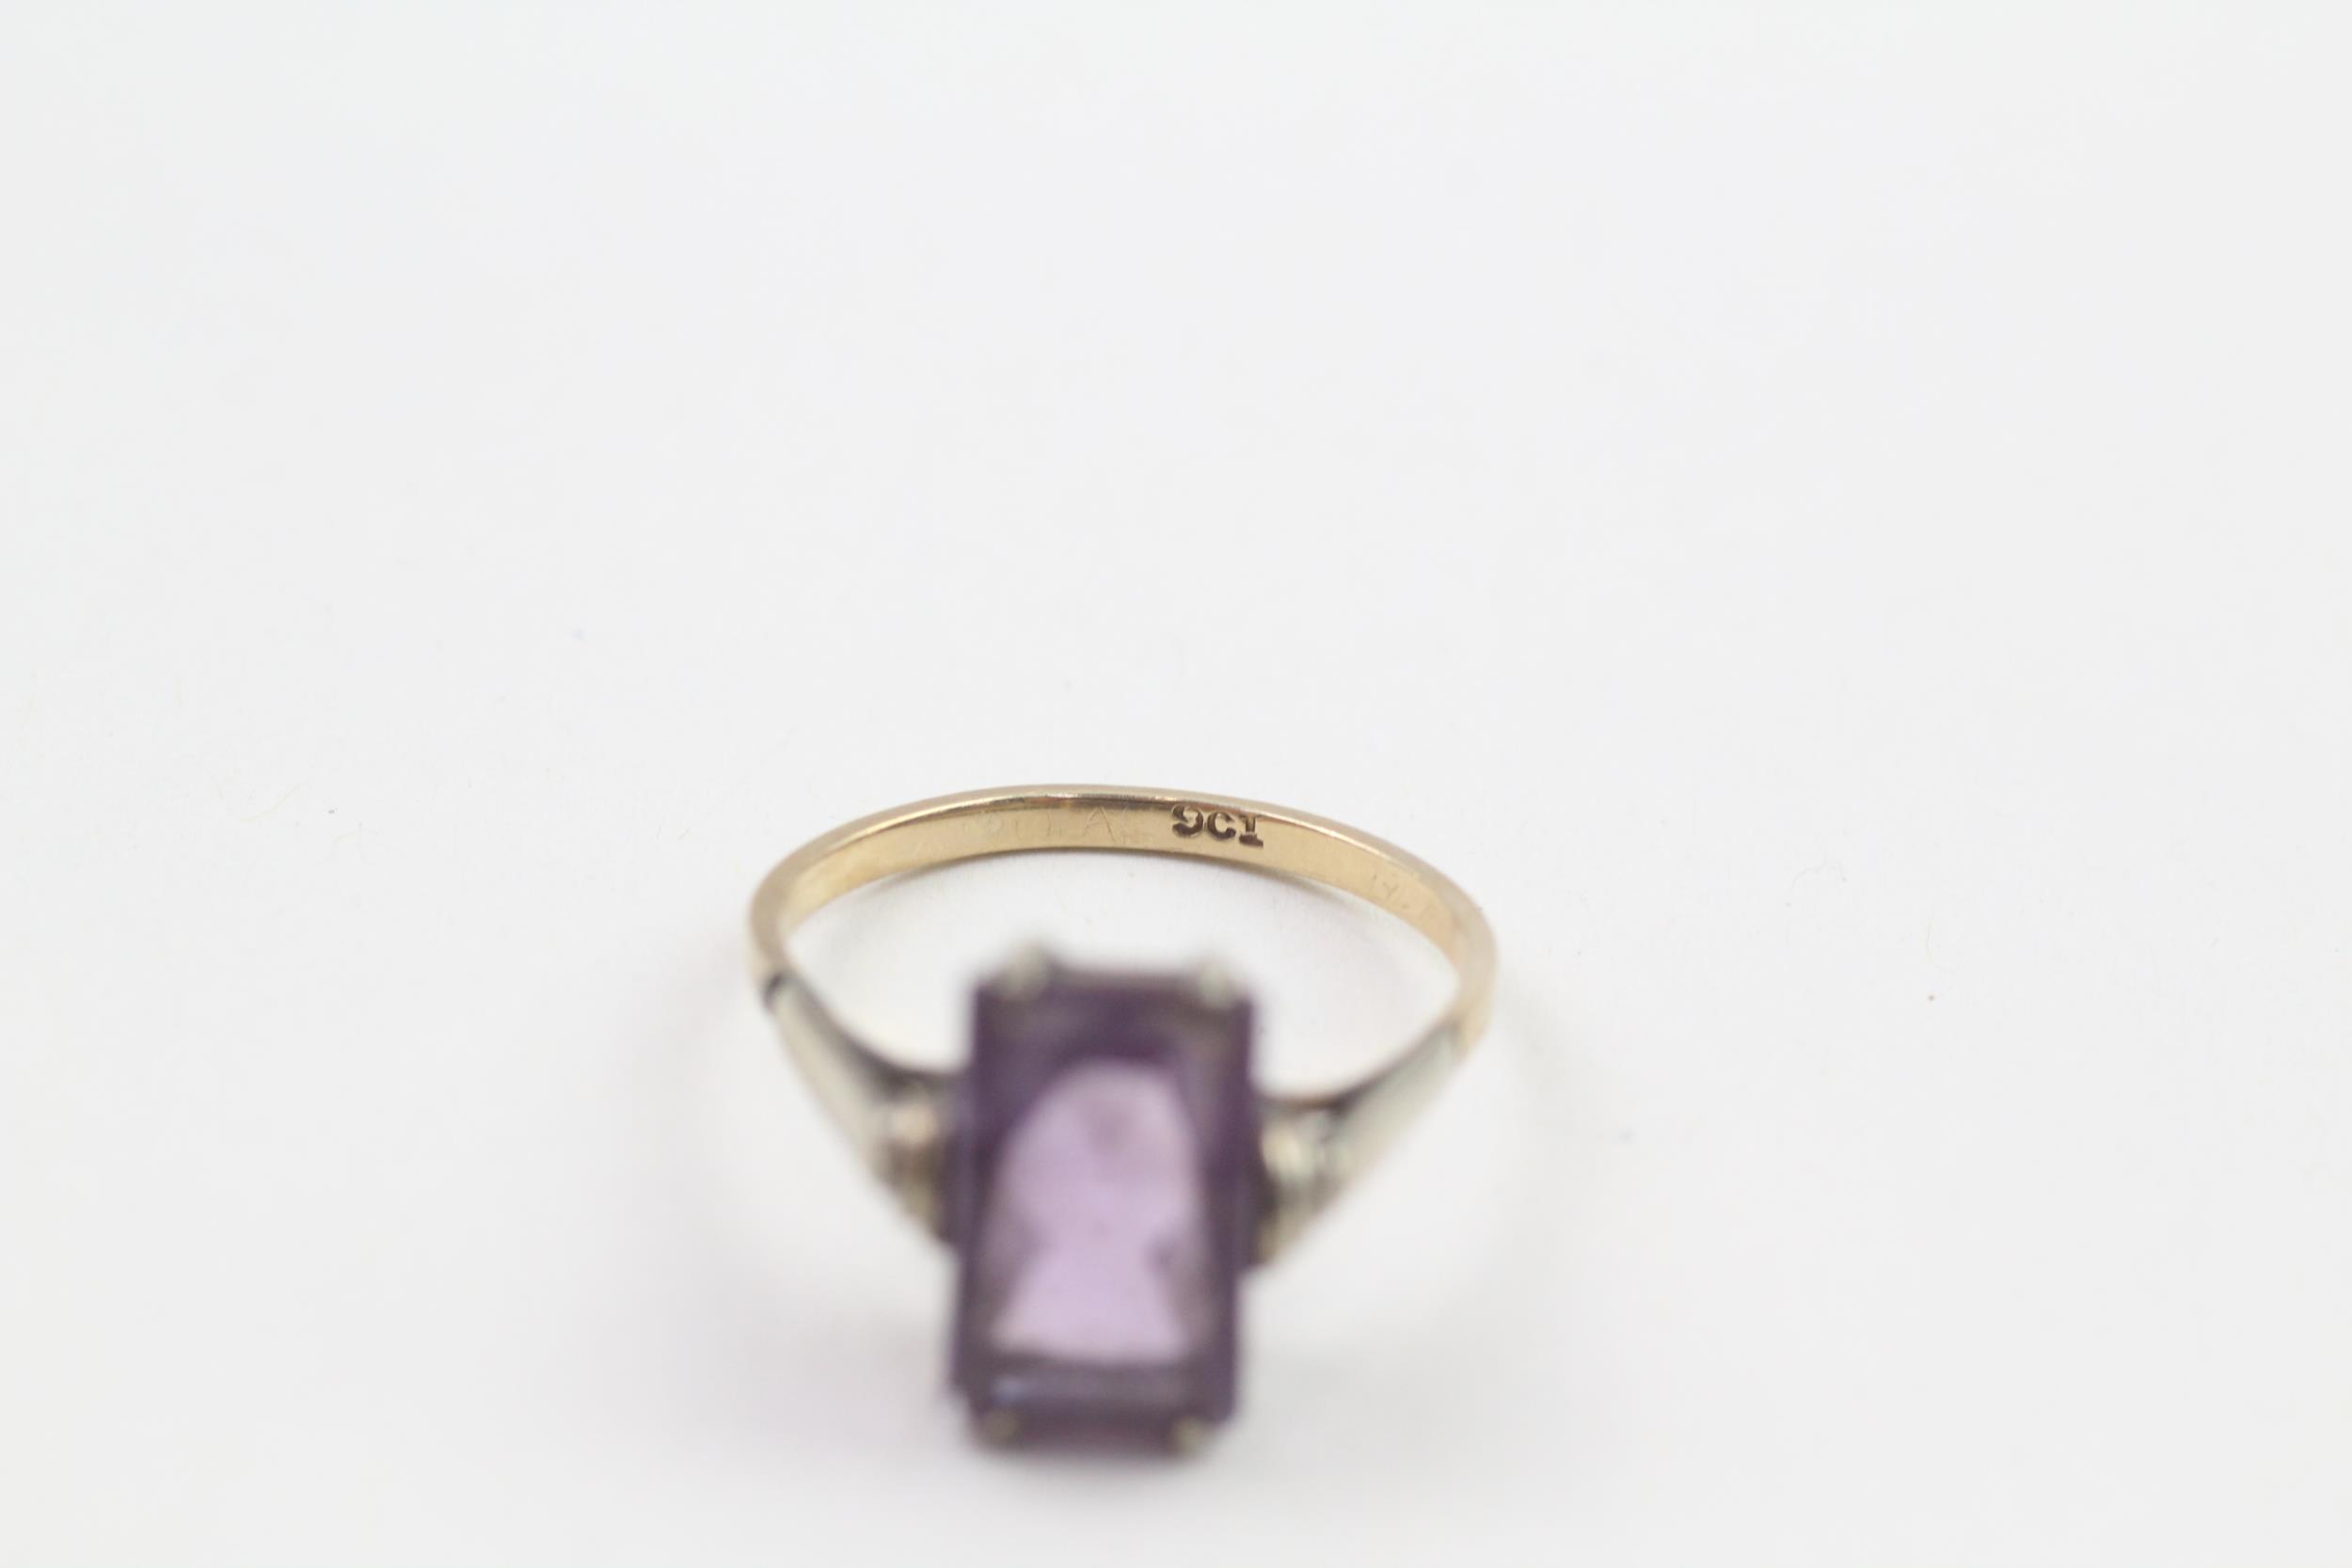 9ct gold antique fancy cut amethyst single stone ring Size L 1/2 2.1 g - Image 2 of 4